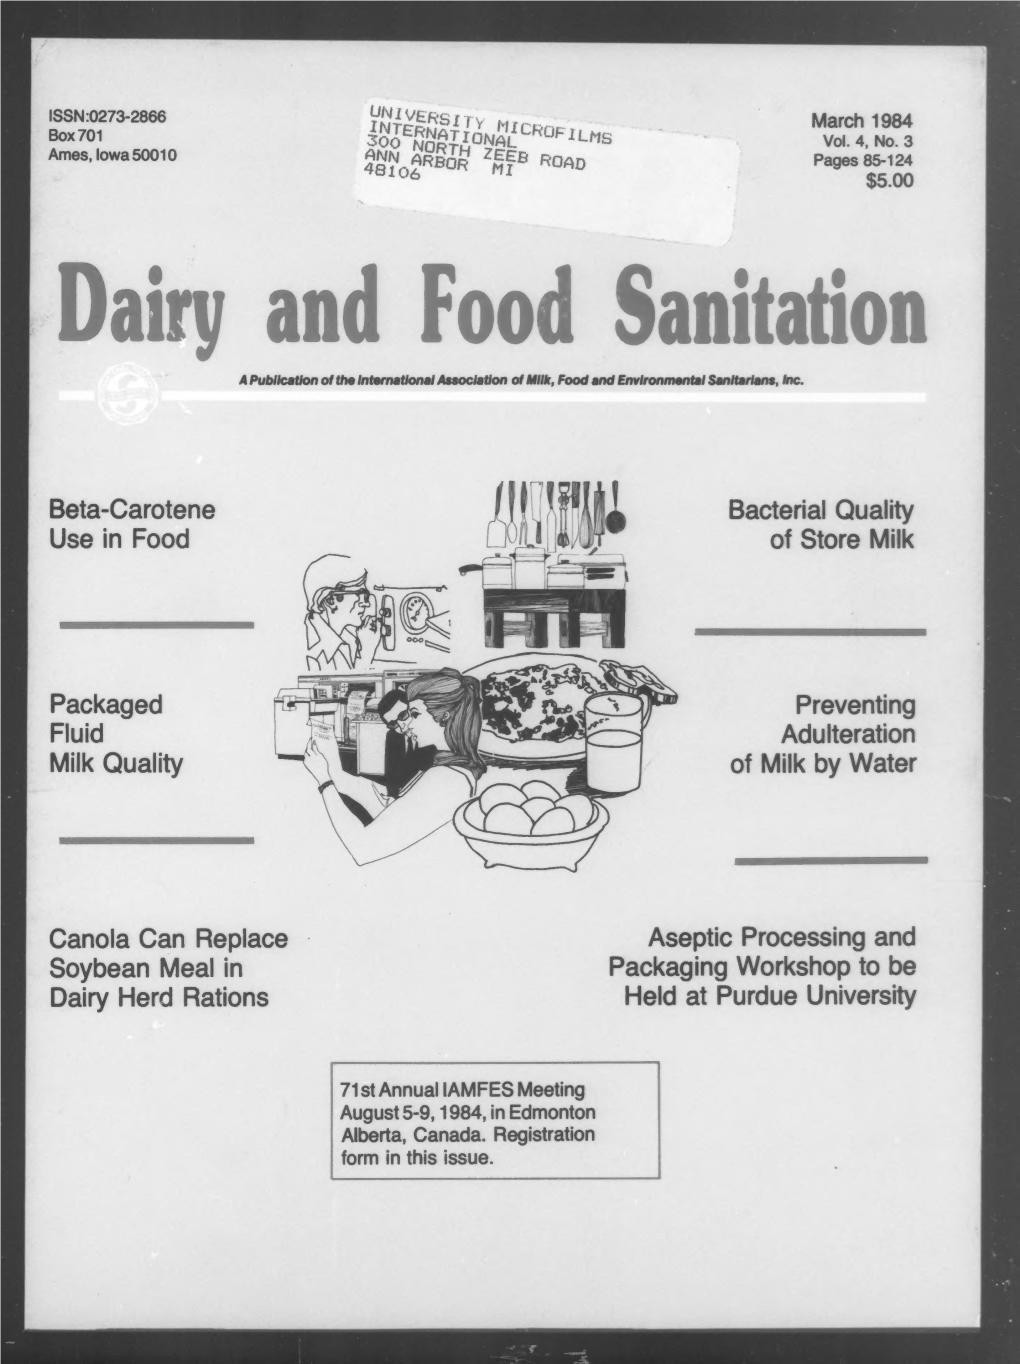 Dairy and Food Sanitation 1984-03: Vol 4 Iss 3